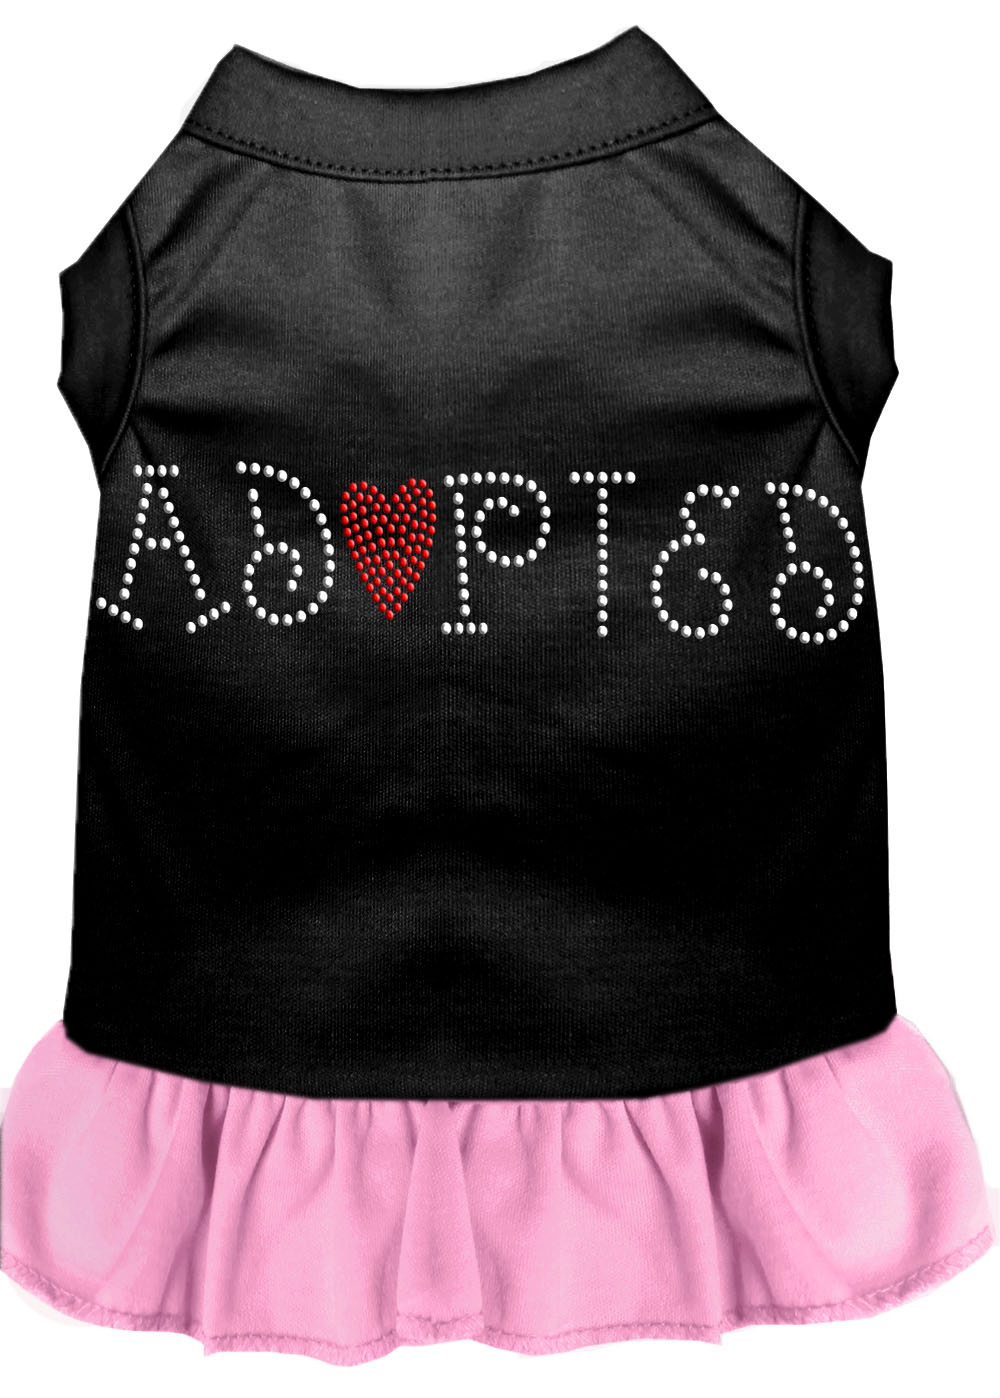 Adopted Rhinestone Dresses Black with Light Pink Med